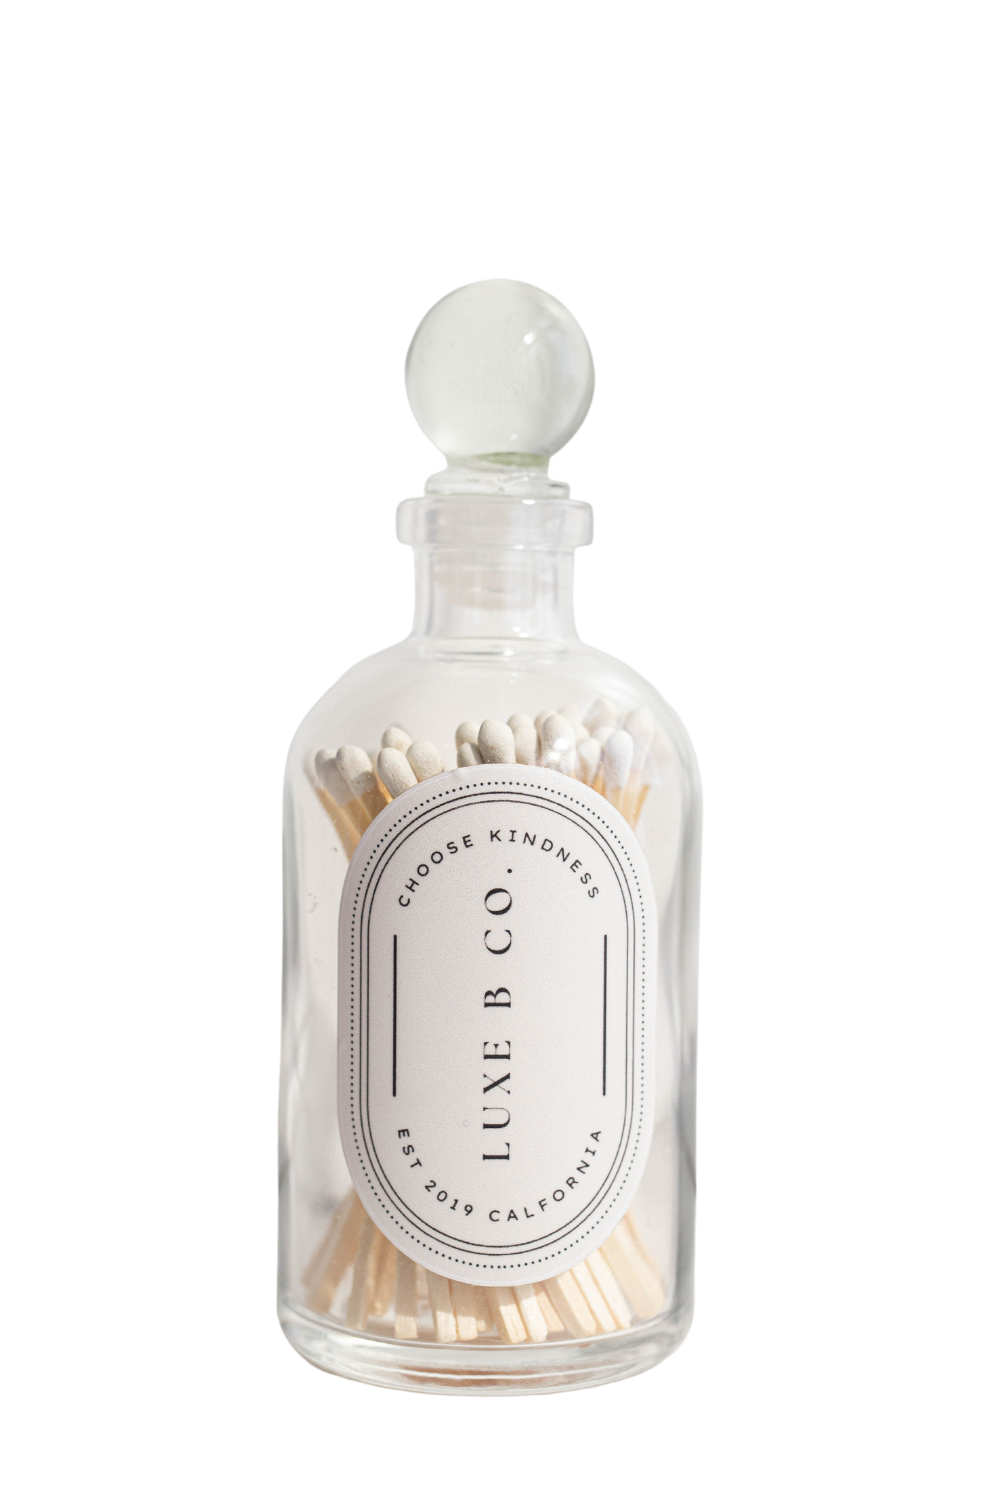 Match Bottles White by Luxe B Co. - Luxe B Co